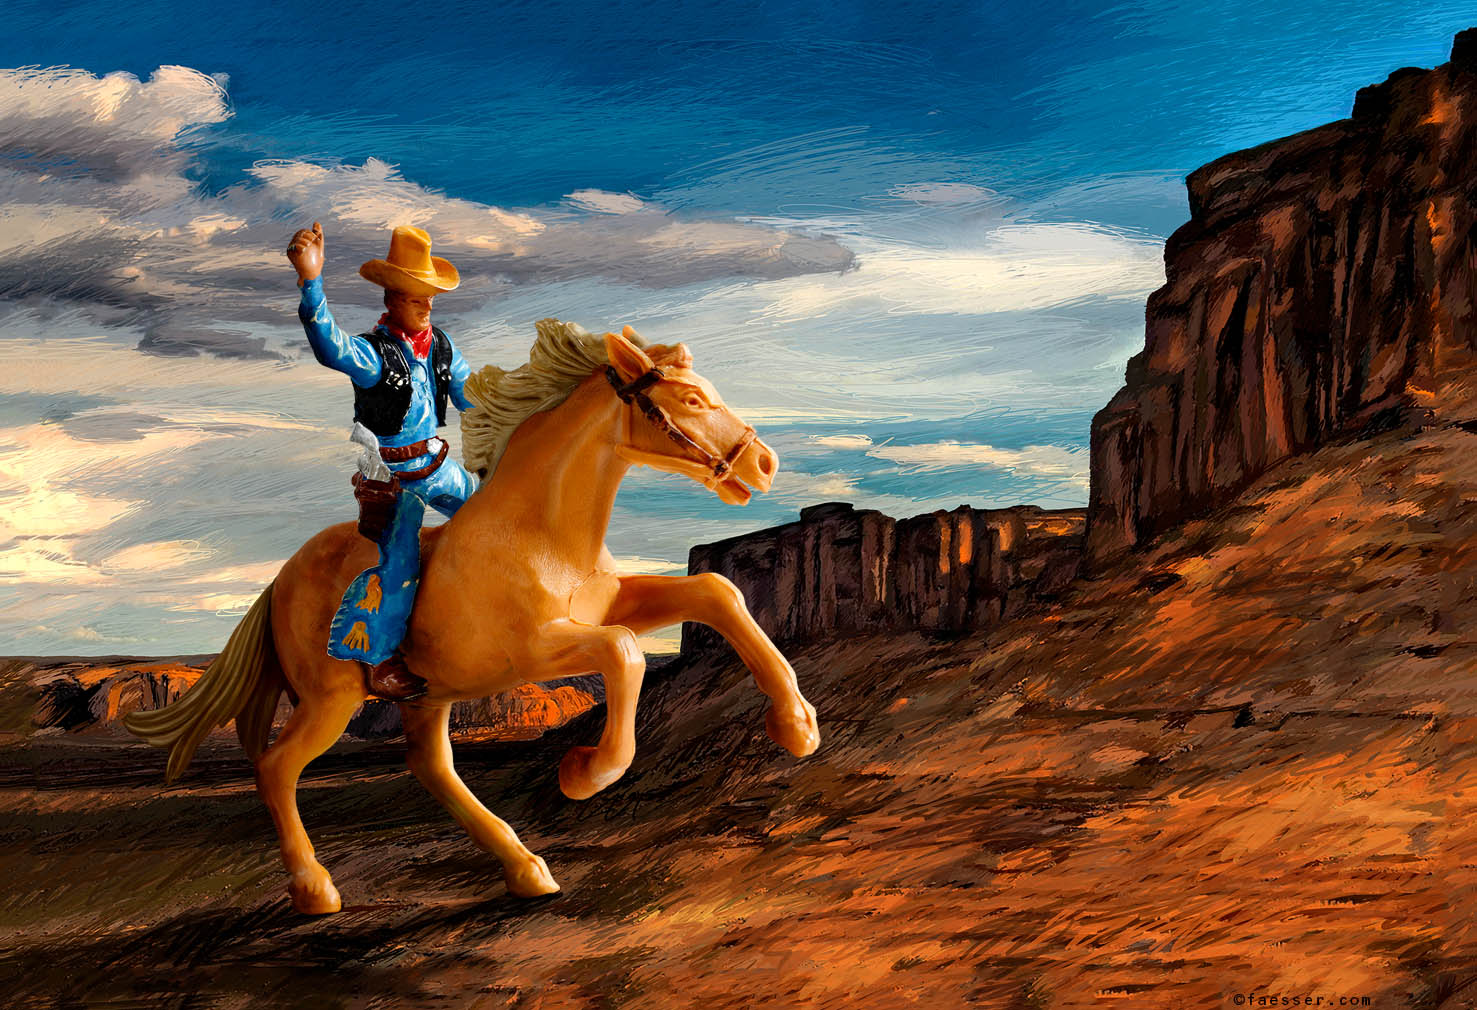 Plastic toy rider with horse, as analogy to the Marlboro ad in the Monument Valley; artist Roland Faesser, sculptor and painter 2013